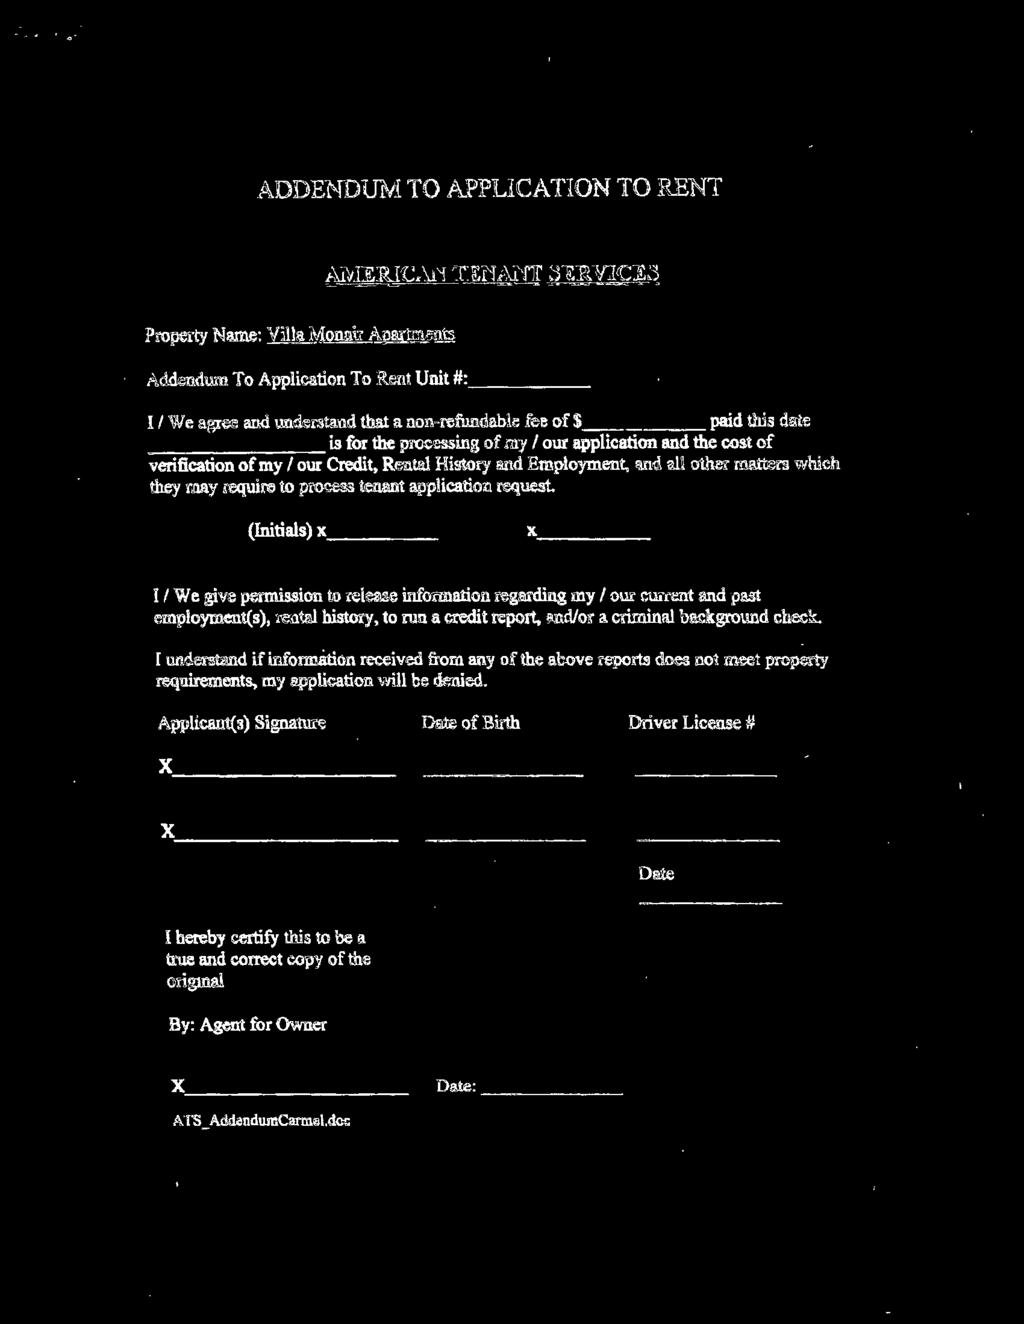 ADDENDUM TO APPLICATION TO RENT Property Name; Villa Mouajr A.partments AMERICAN TENANT SERVICES Addendum To Application To Rent Unit#: 45.